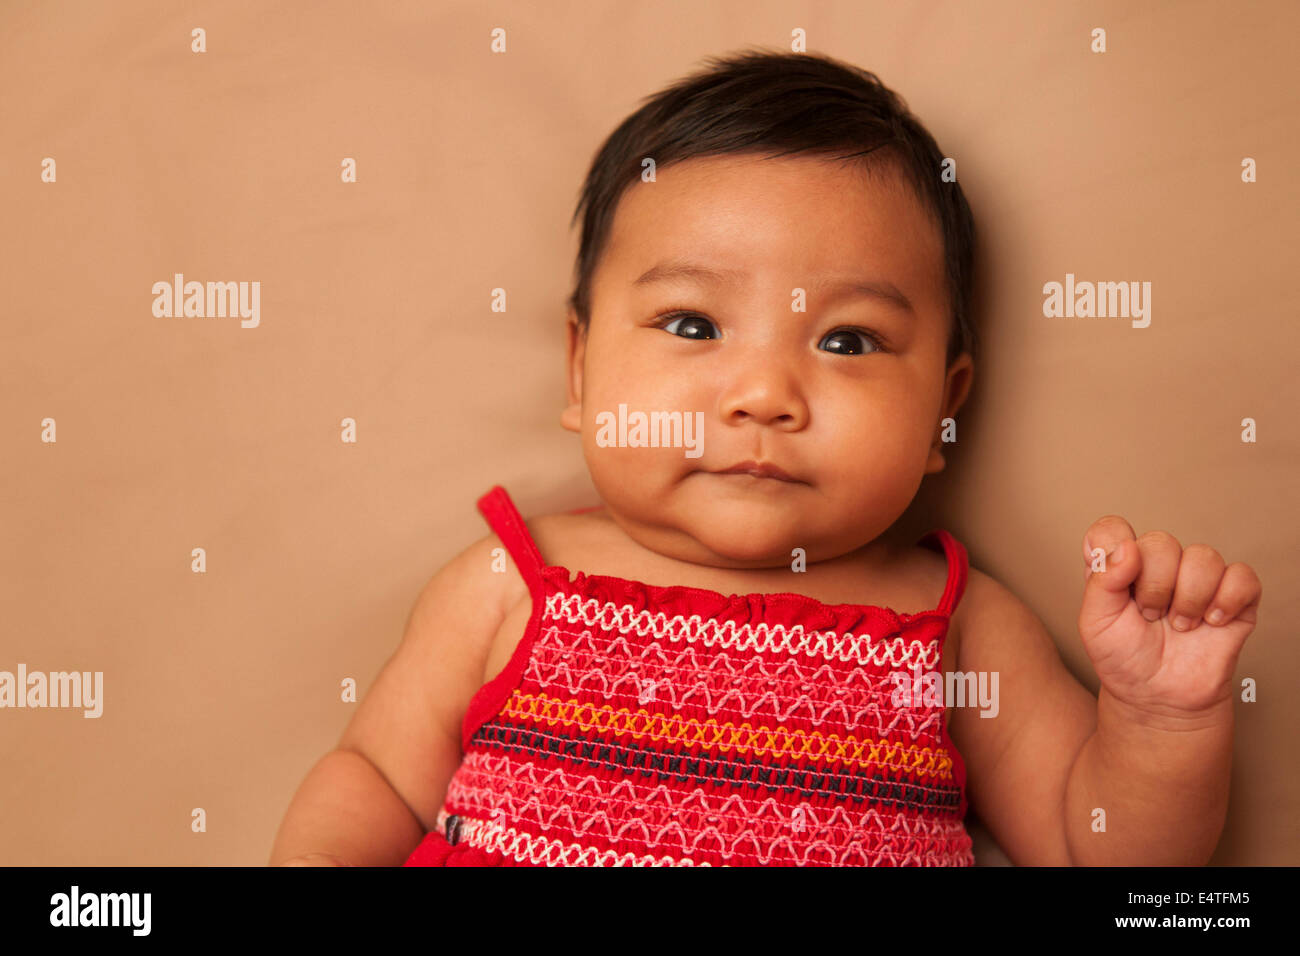 Close-up portrait of Asian baby lying on back, wearing red dress, looking at camera and smiling, studio shot on brown background Stock Photo